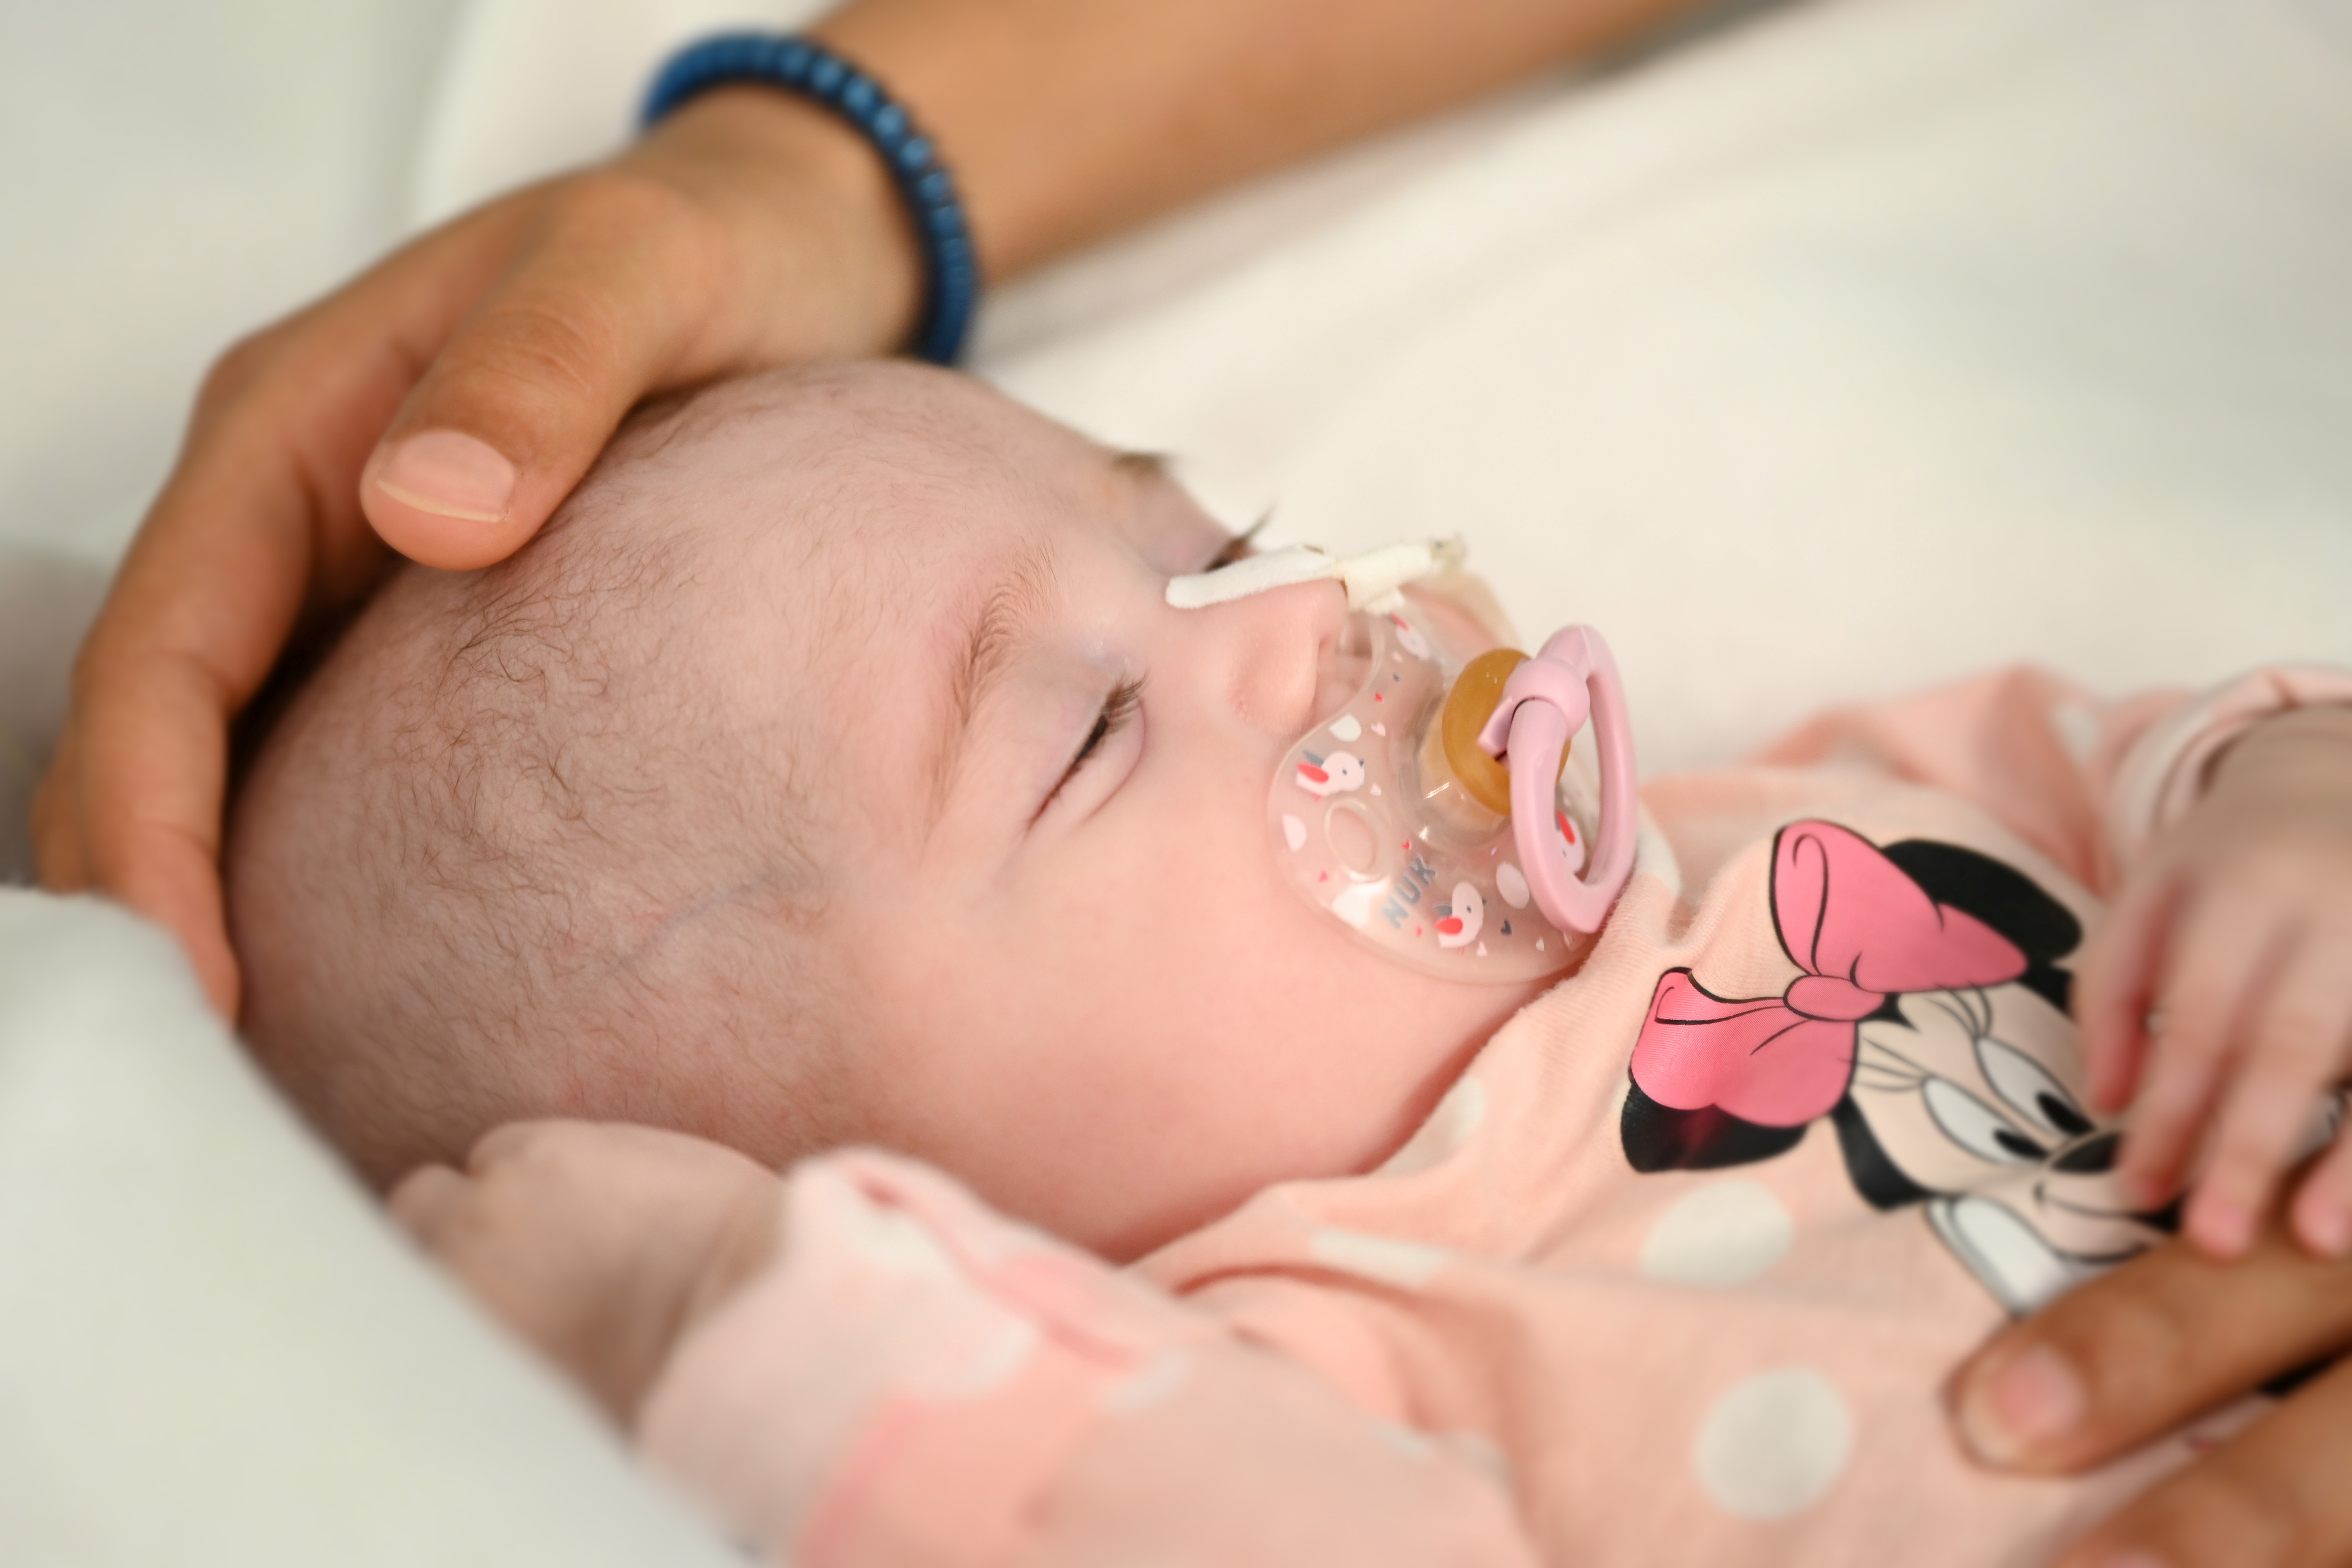 Two-month old Spanish baby girl Naiara, who received a heart transplant in a pioneering surgery, is seen in this handout picture released by Gregorio Maranon Hospital in Madrid